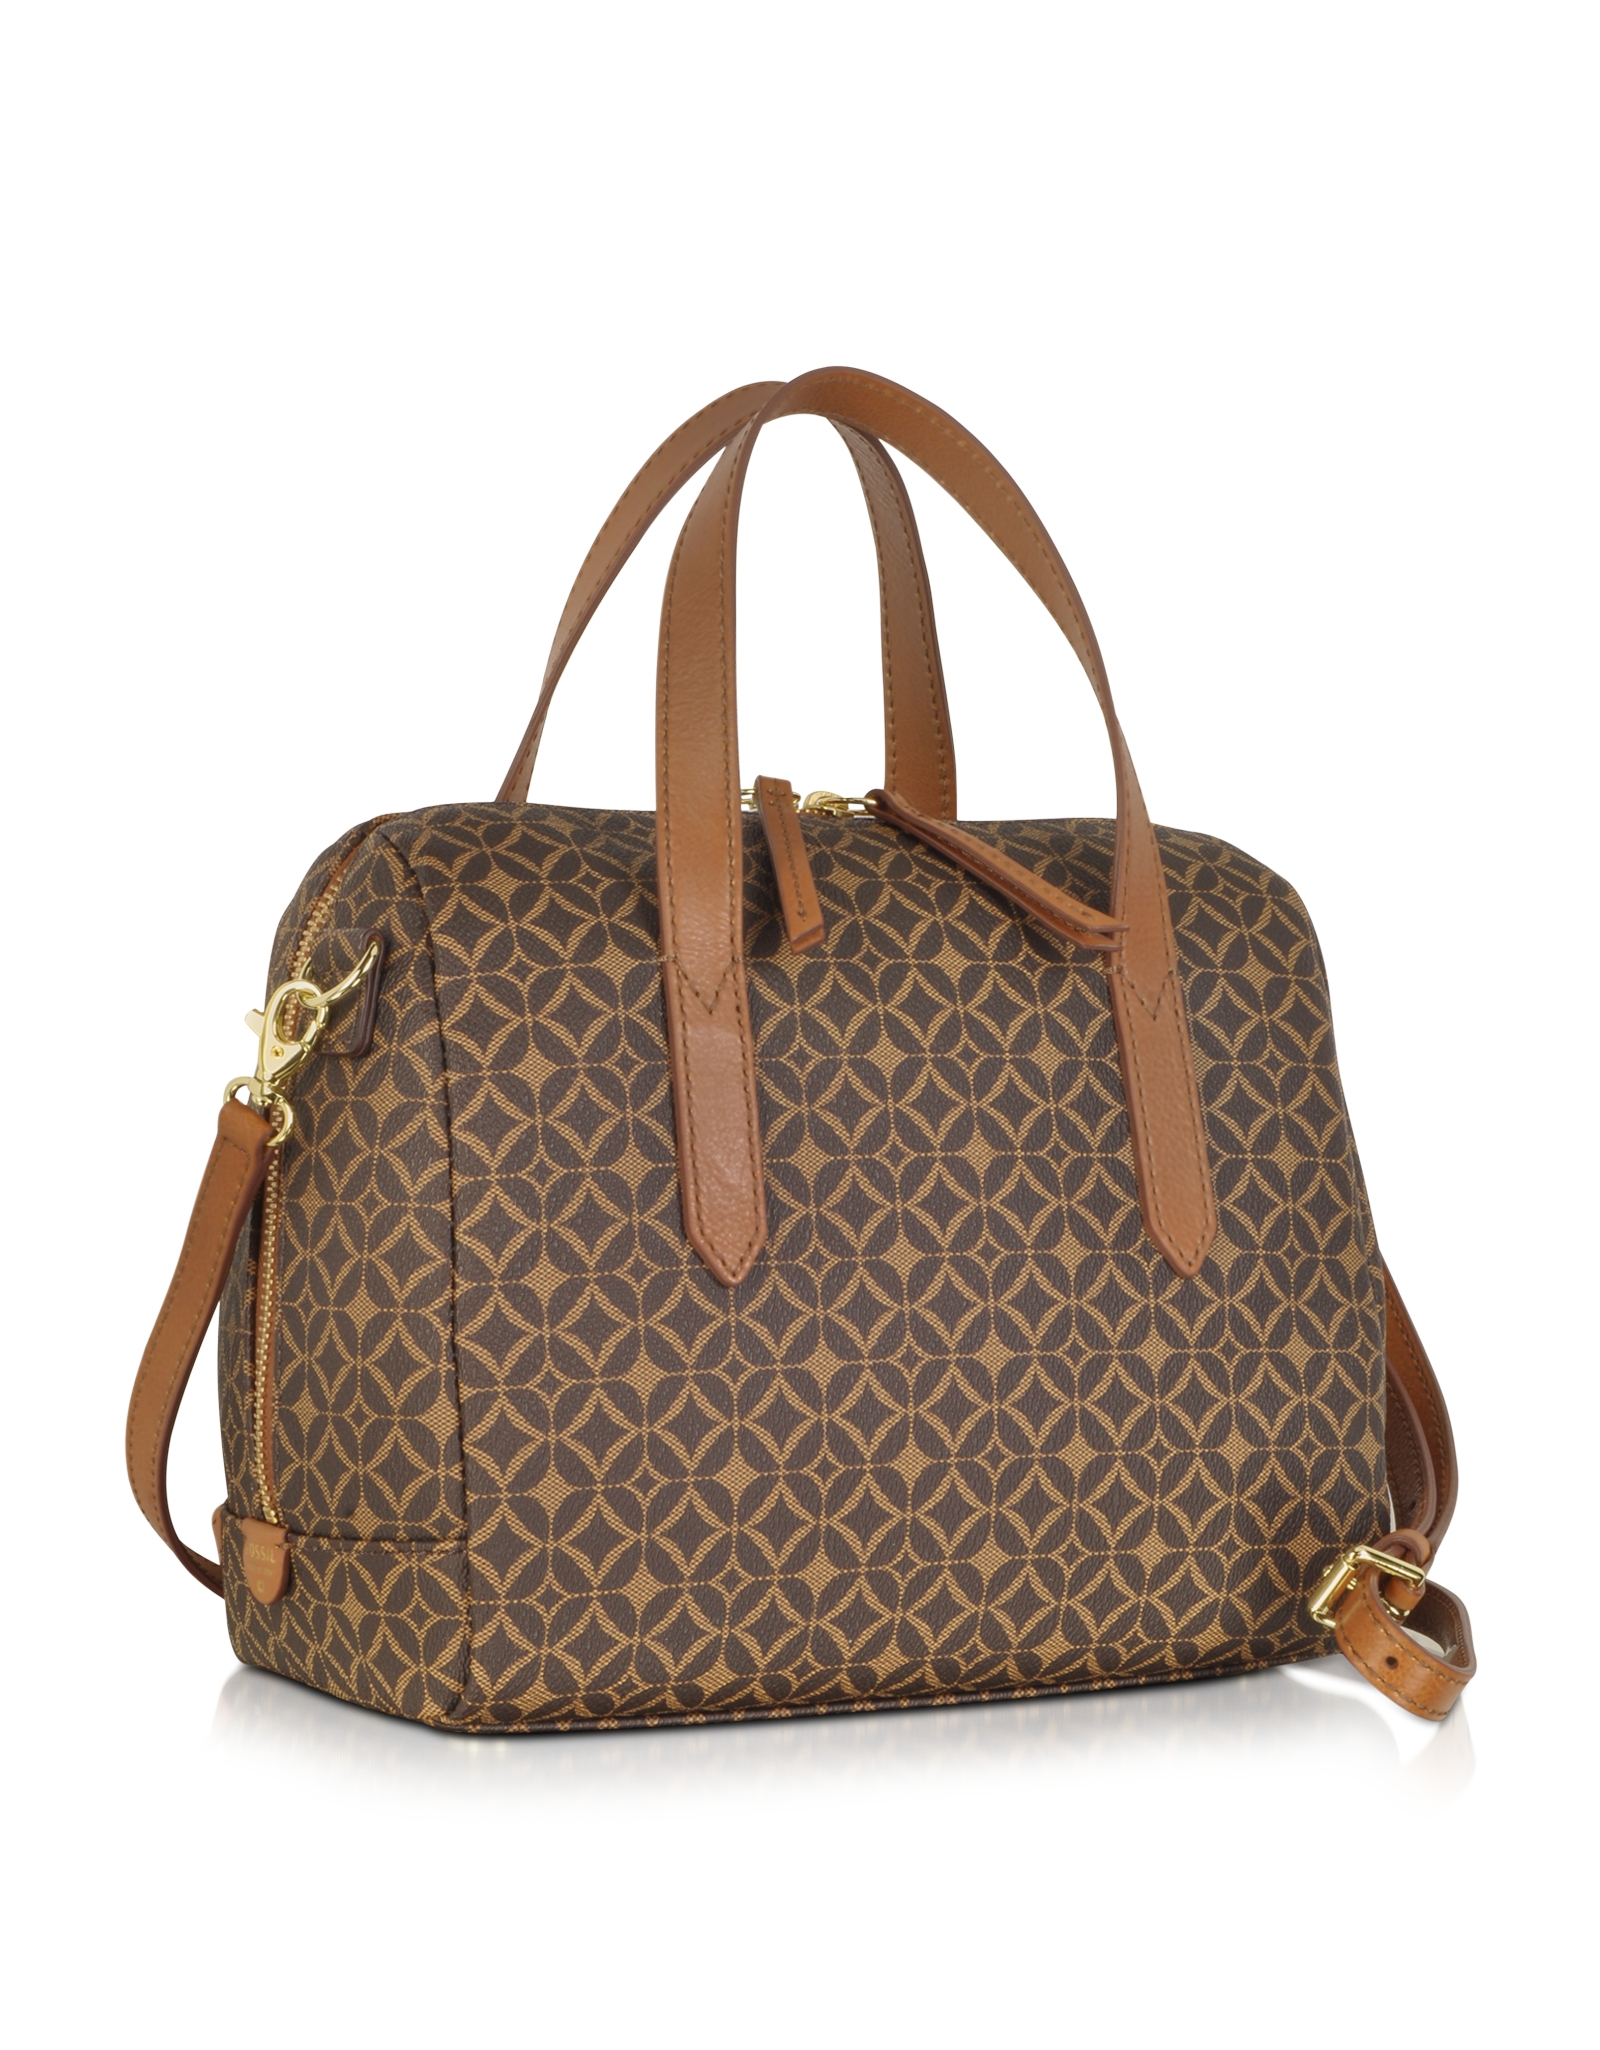 Fossil Sydney Signature Satchel in Gold (Brown) - Lyst